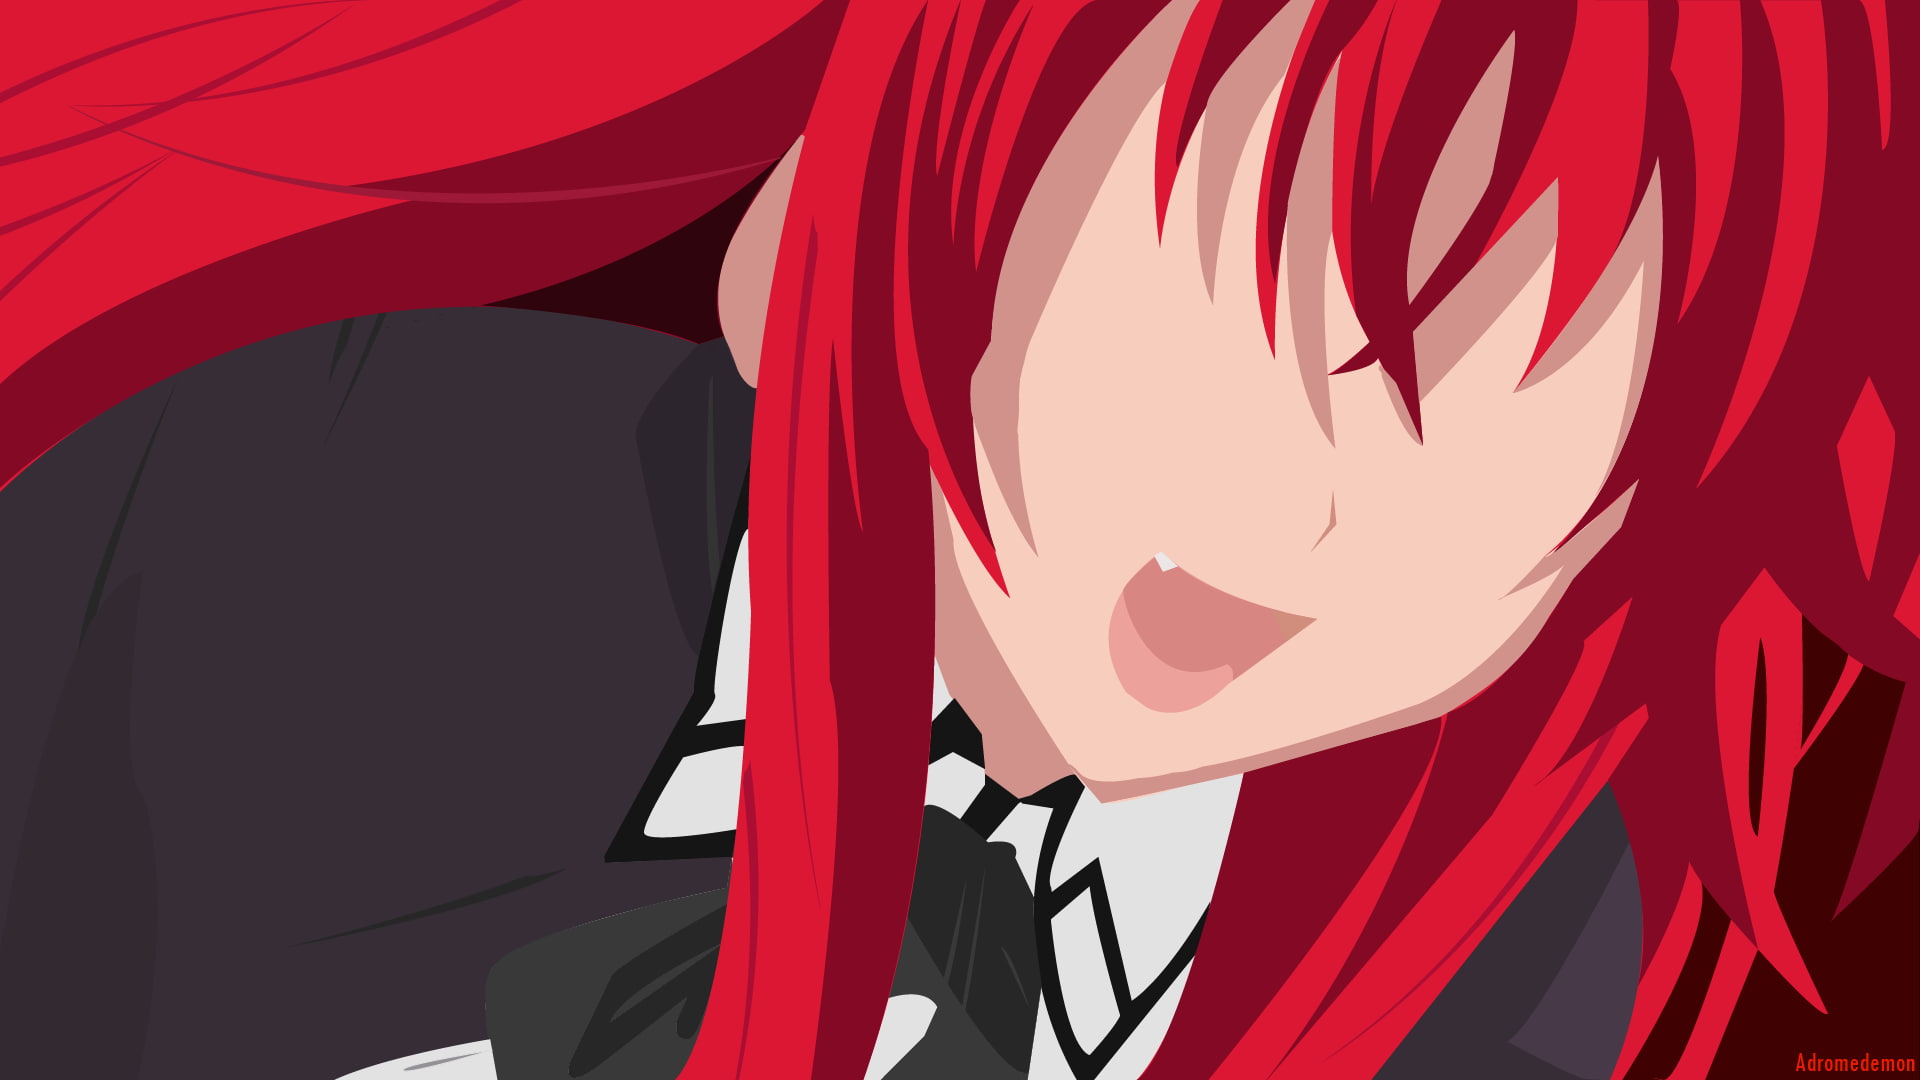 Highschool DxD, anime girls, Gremory Rias, red, no people, full frame